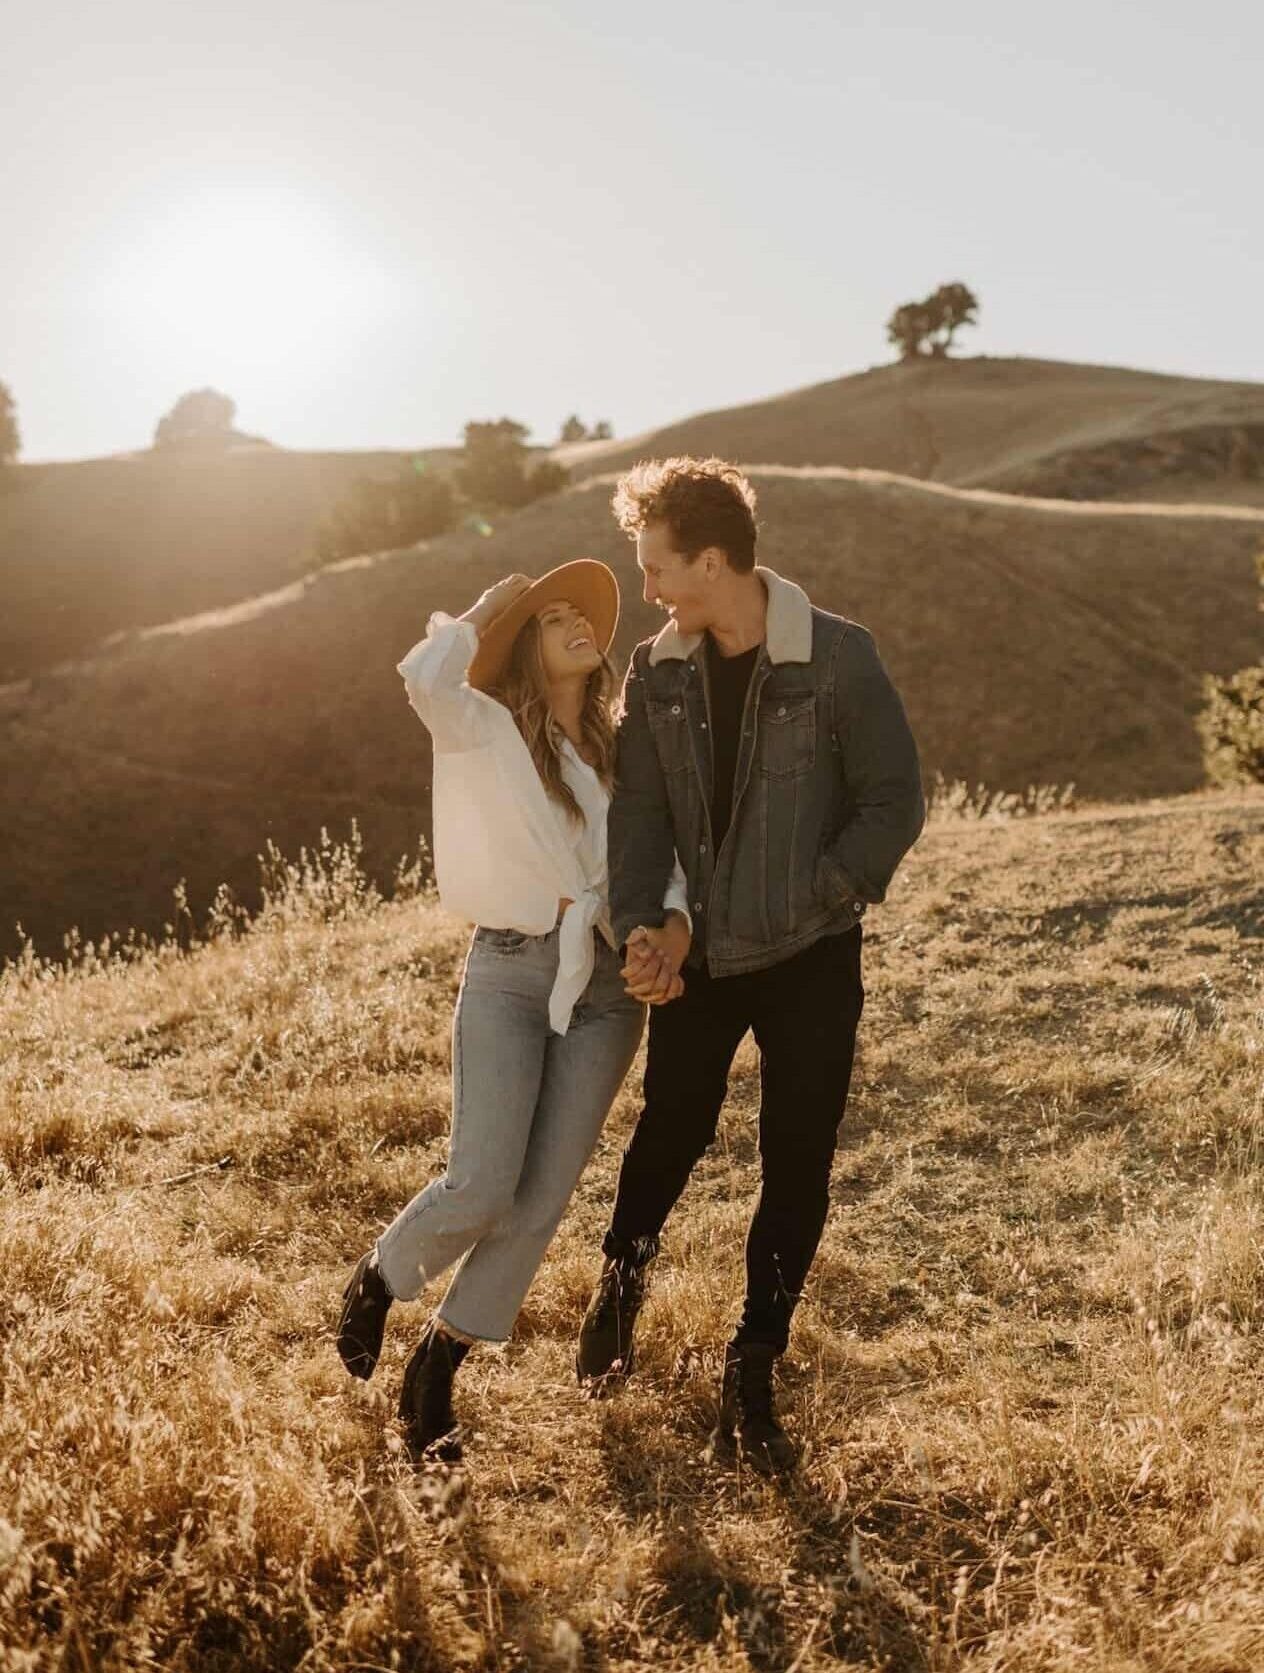 Young man and young woman hold hands and look at each other lovingly outside on a hill.